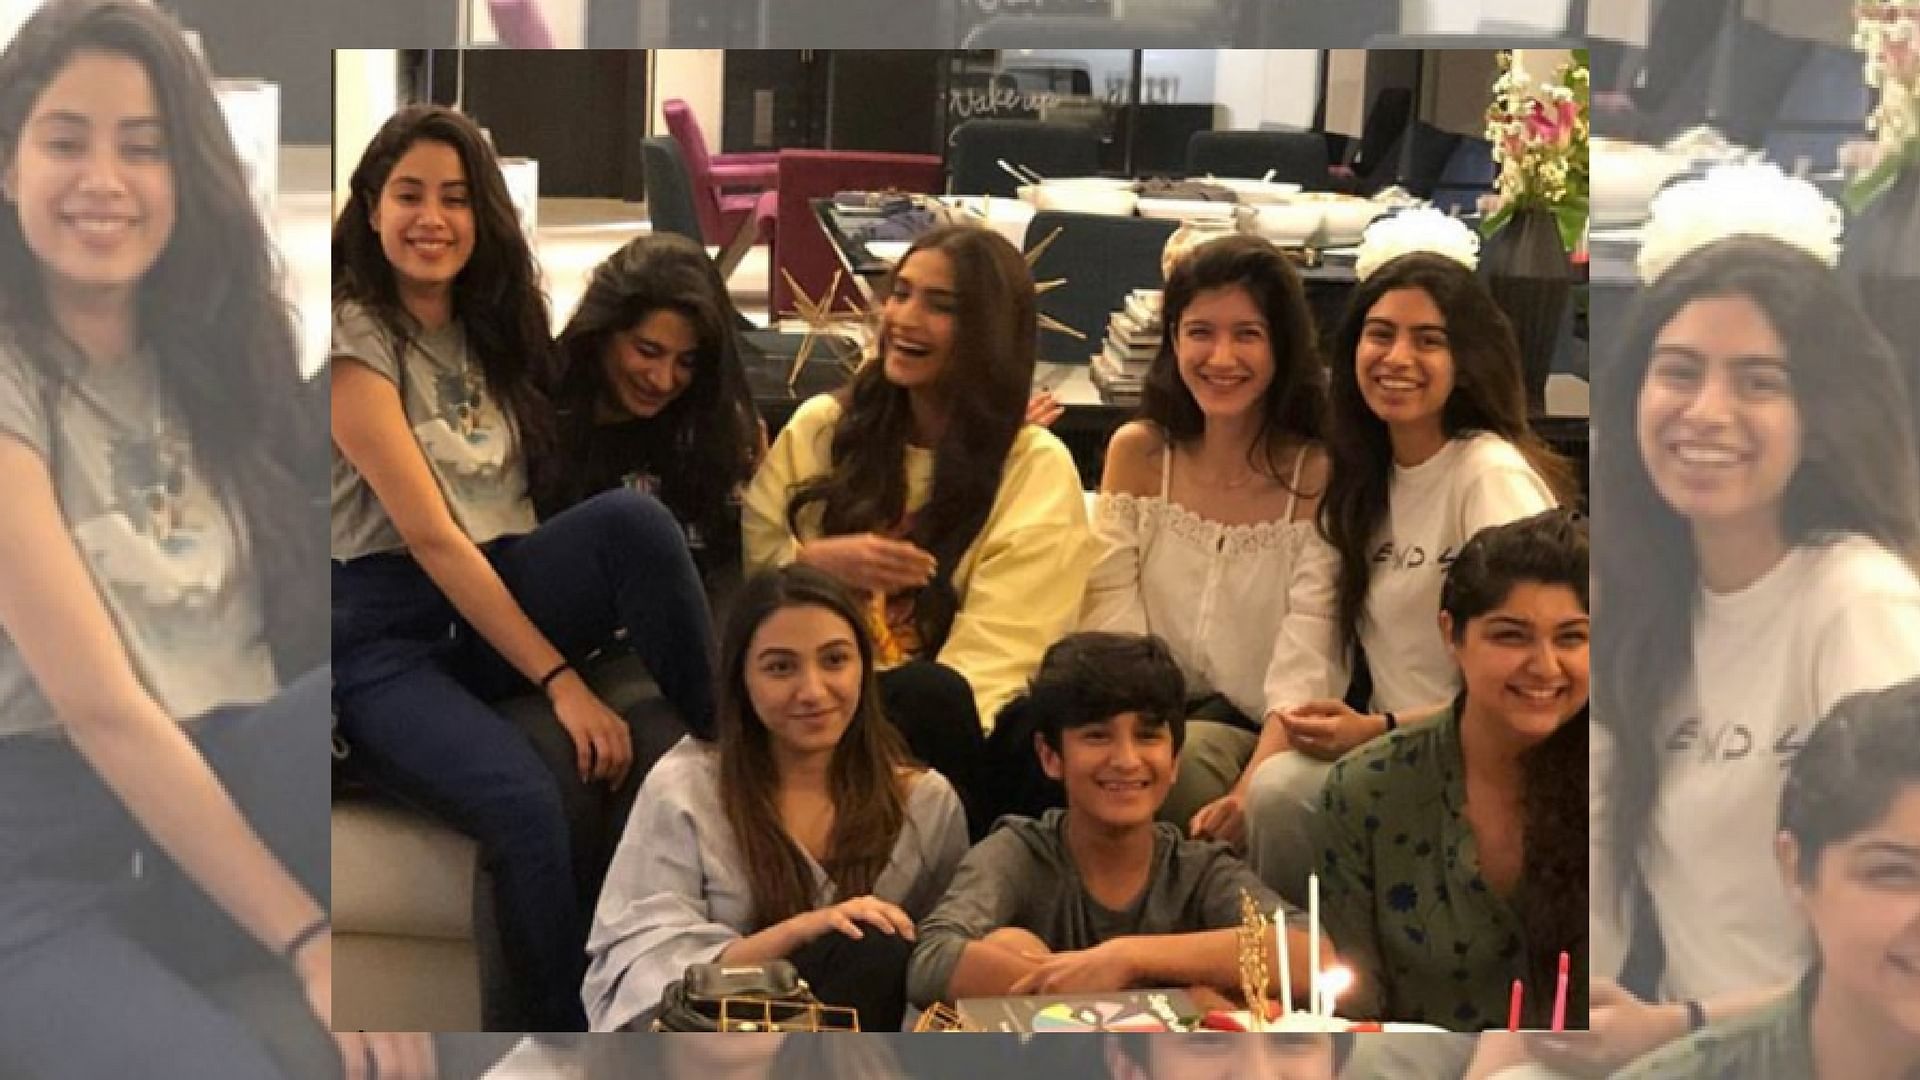 Janhvi, Rhea, Sonam, Khushi and Anshula Kapoor are seen in this picture.(Photo courtesy: Instagram)